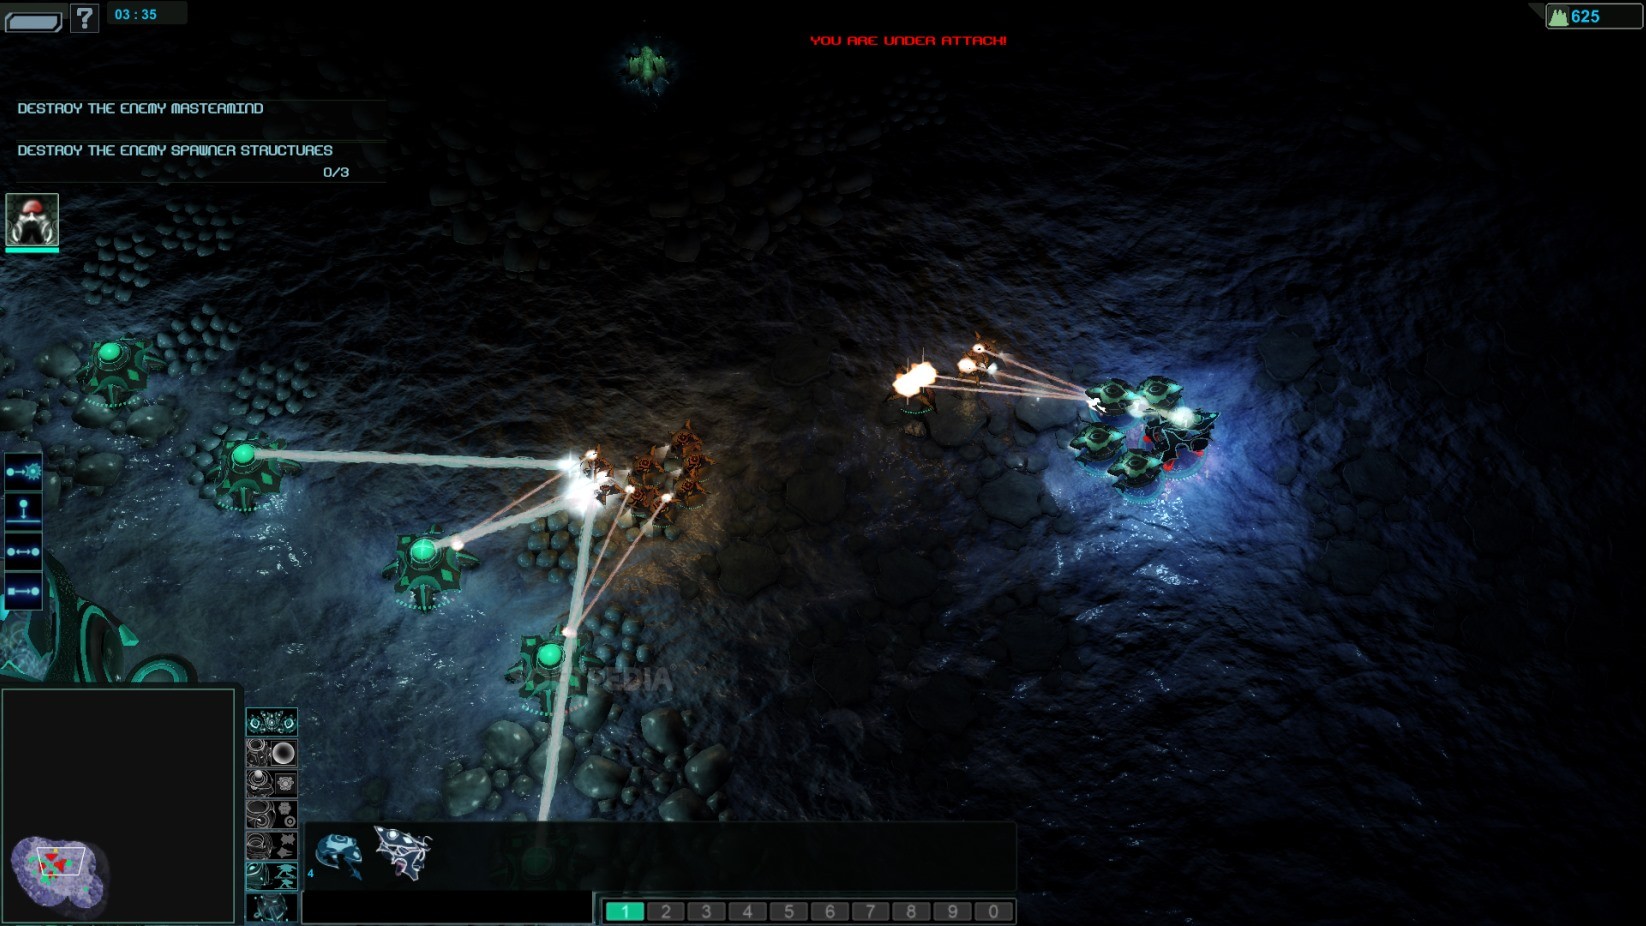 Download Nightside Game : Download Sky Rogue Full PC Game : Nightside game is released on 2 april 2015, this game is developed and published by omnidream creations.